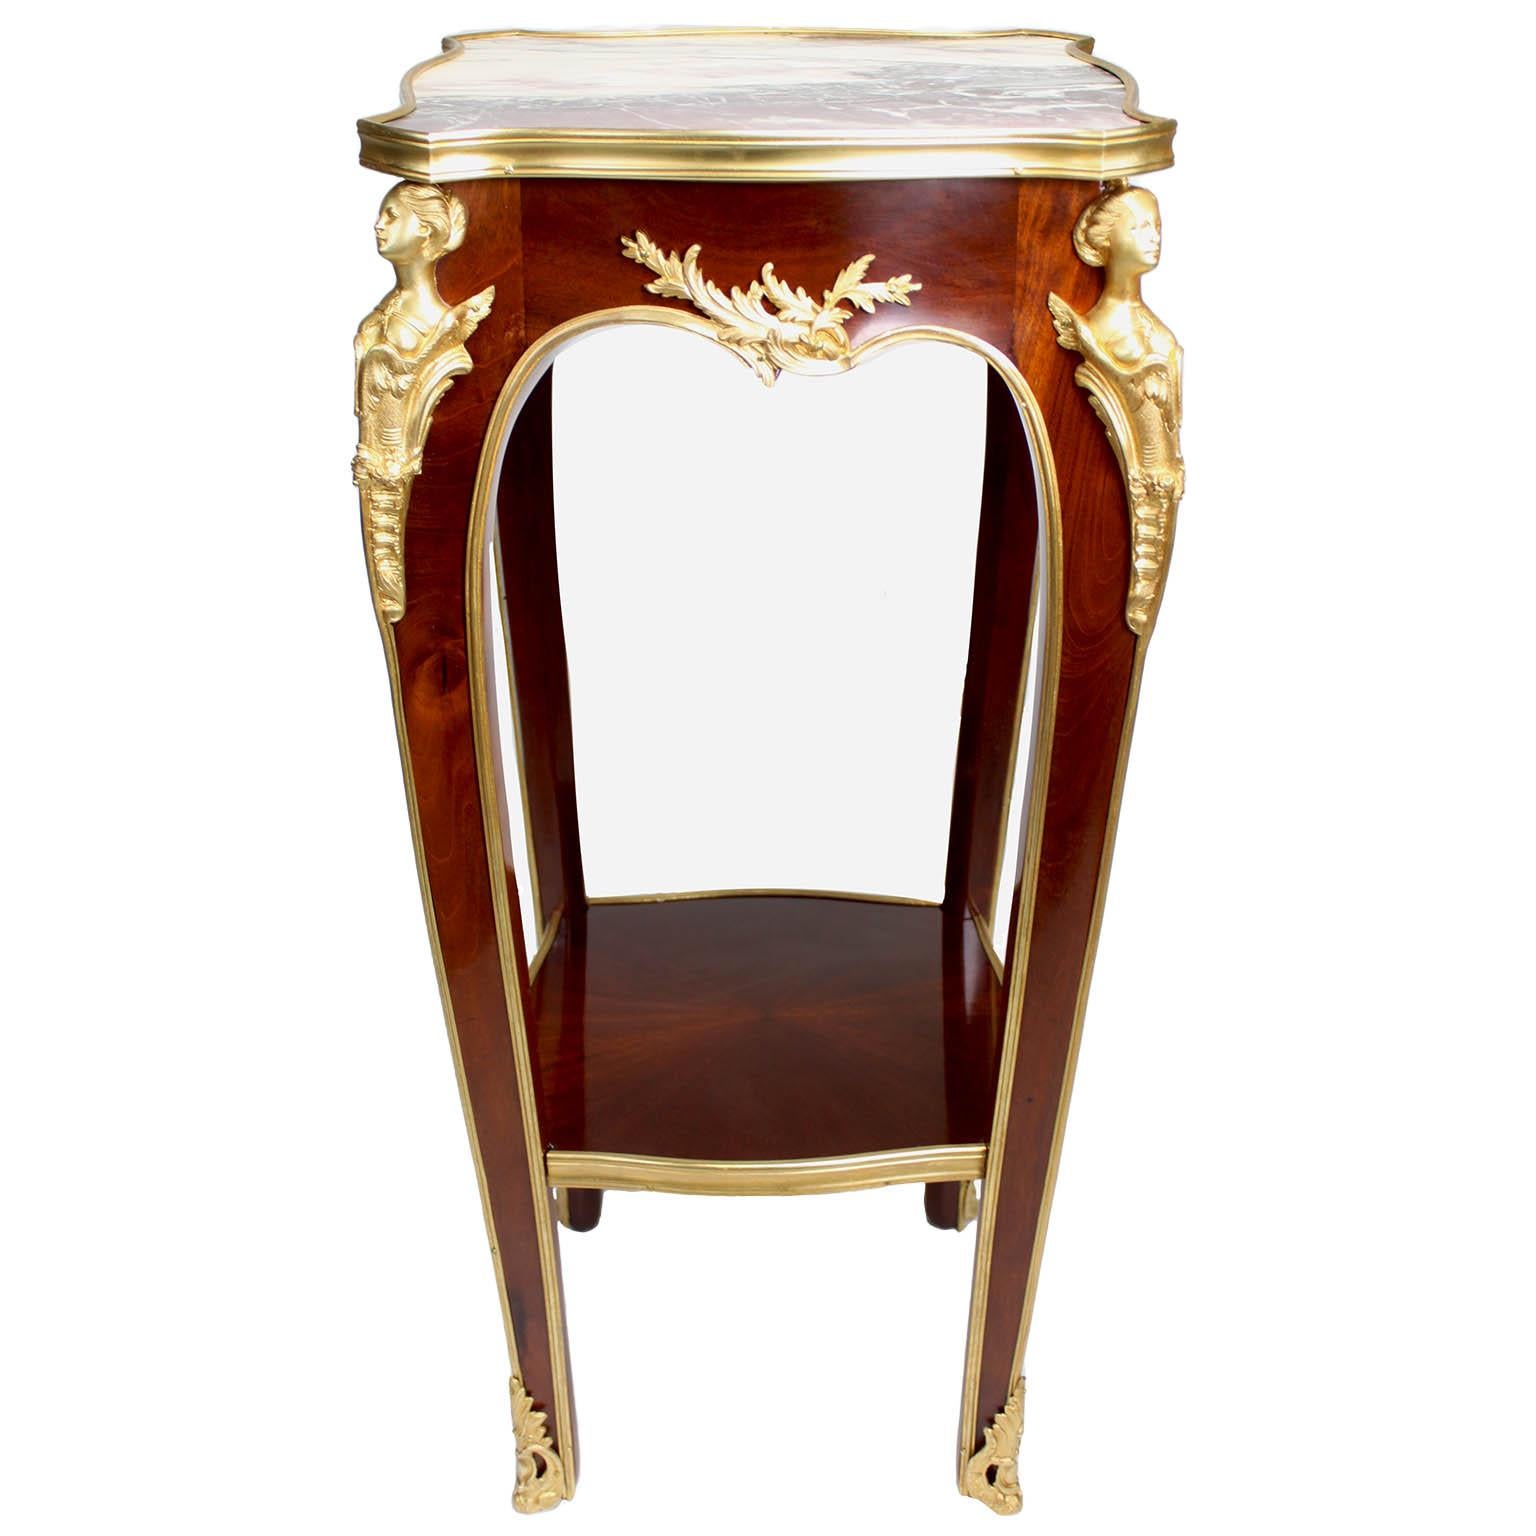 A fine French Louis XV Style Mahogany and Gilt-Bronze (Ormolu) Mounted Side Table, Attributed to Franc¸ois Linke (1855-1946). The square shaped table fitted with a Bre^che Violette marble top with a gilt bronze trim, the body surmounted on each